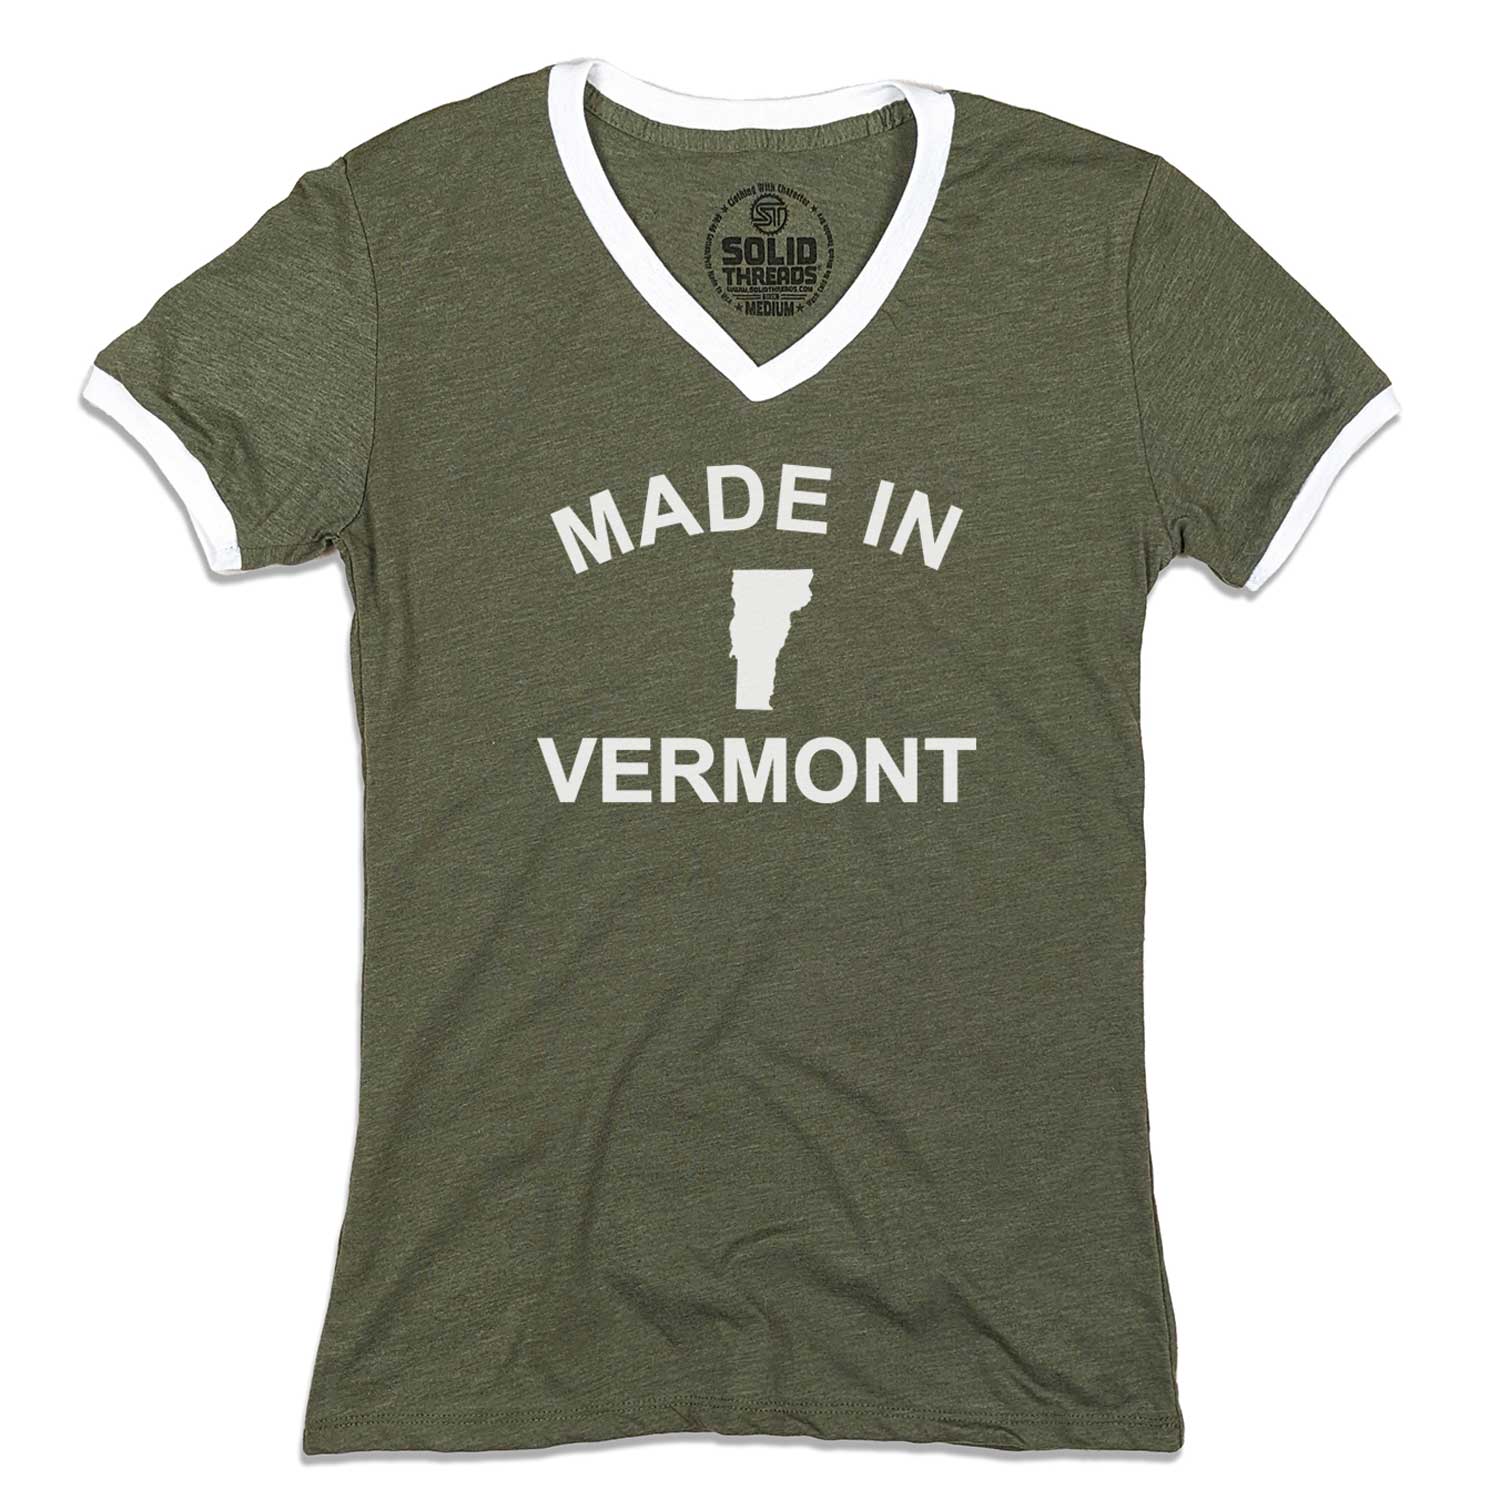 Women's Made in Vermont Vintage Graphic V-Neck Tee | Retro Green Mountains T-Shirt | Solid Threads